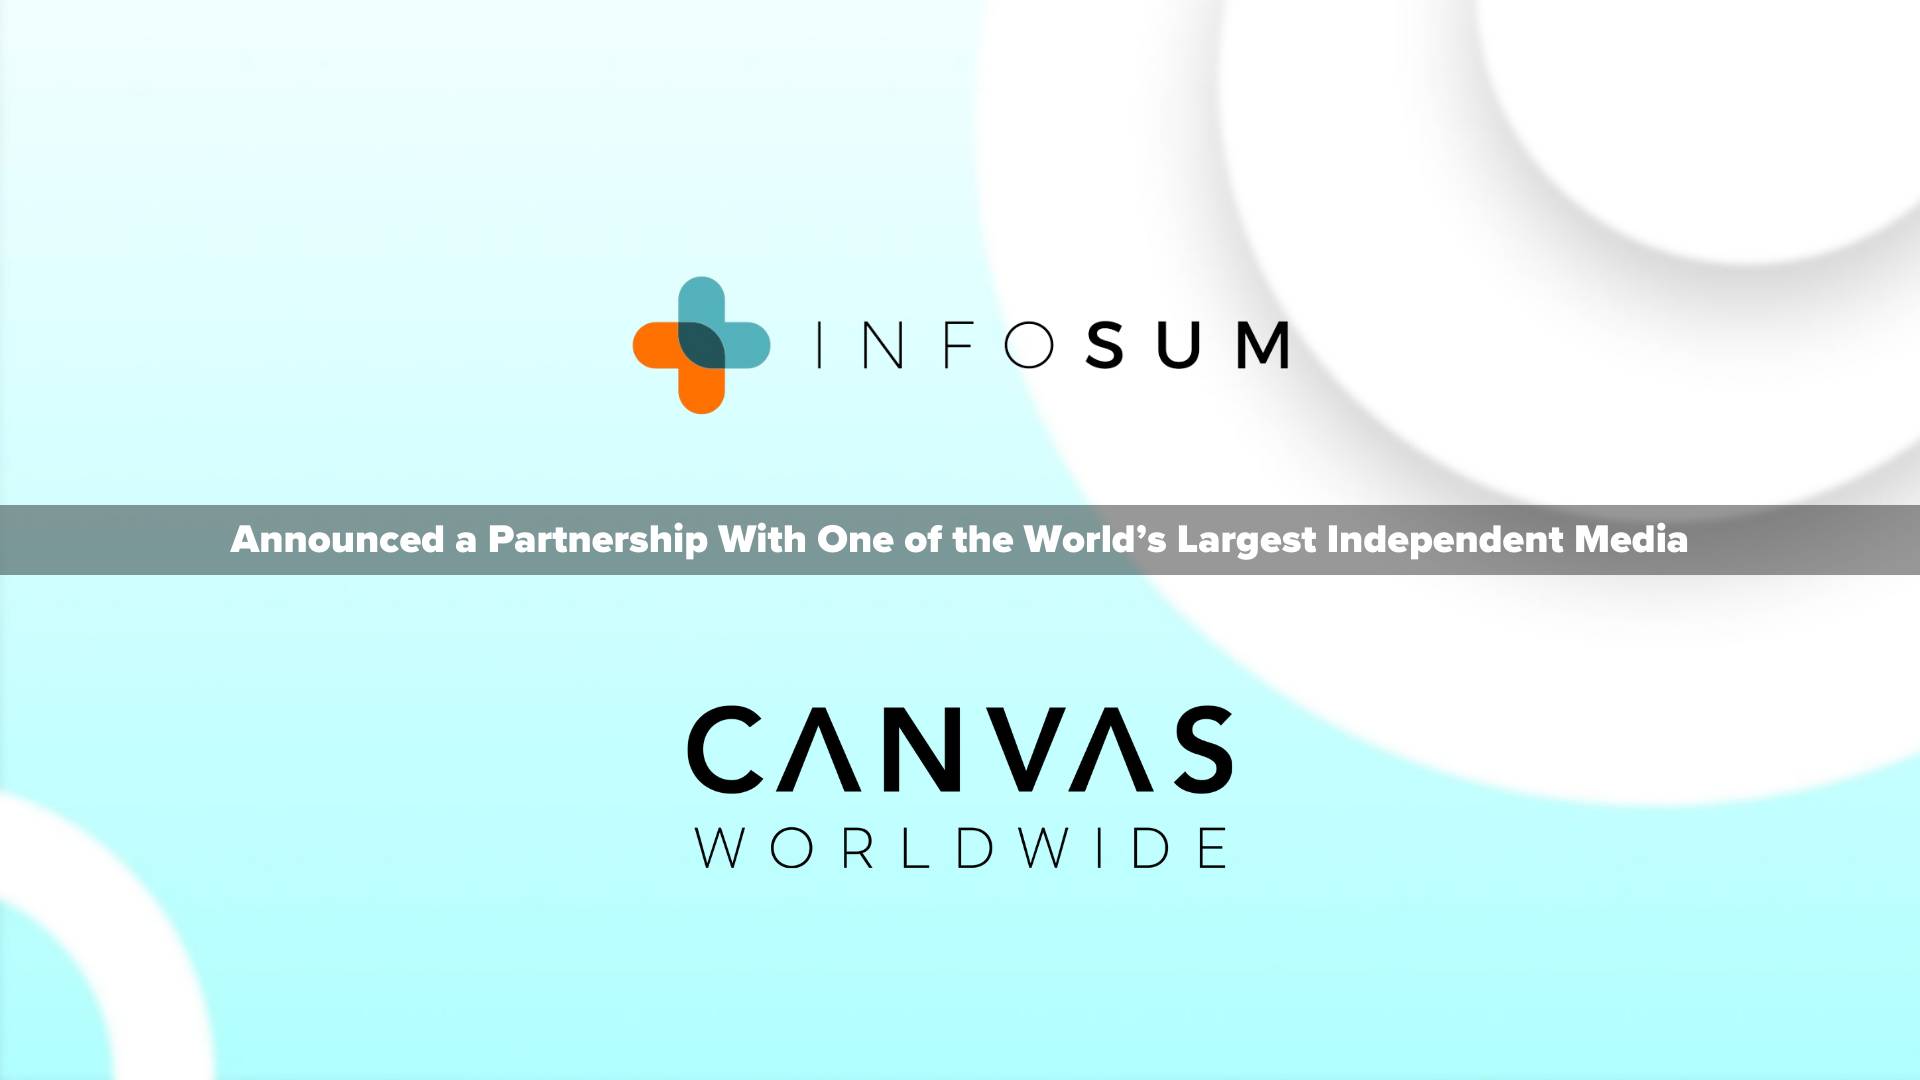 InfoSum partners with Canvas Worldwide, enabling Canvas clients to expand capabilities with their first-party data